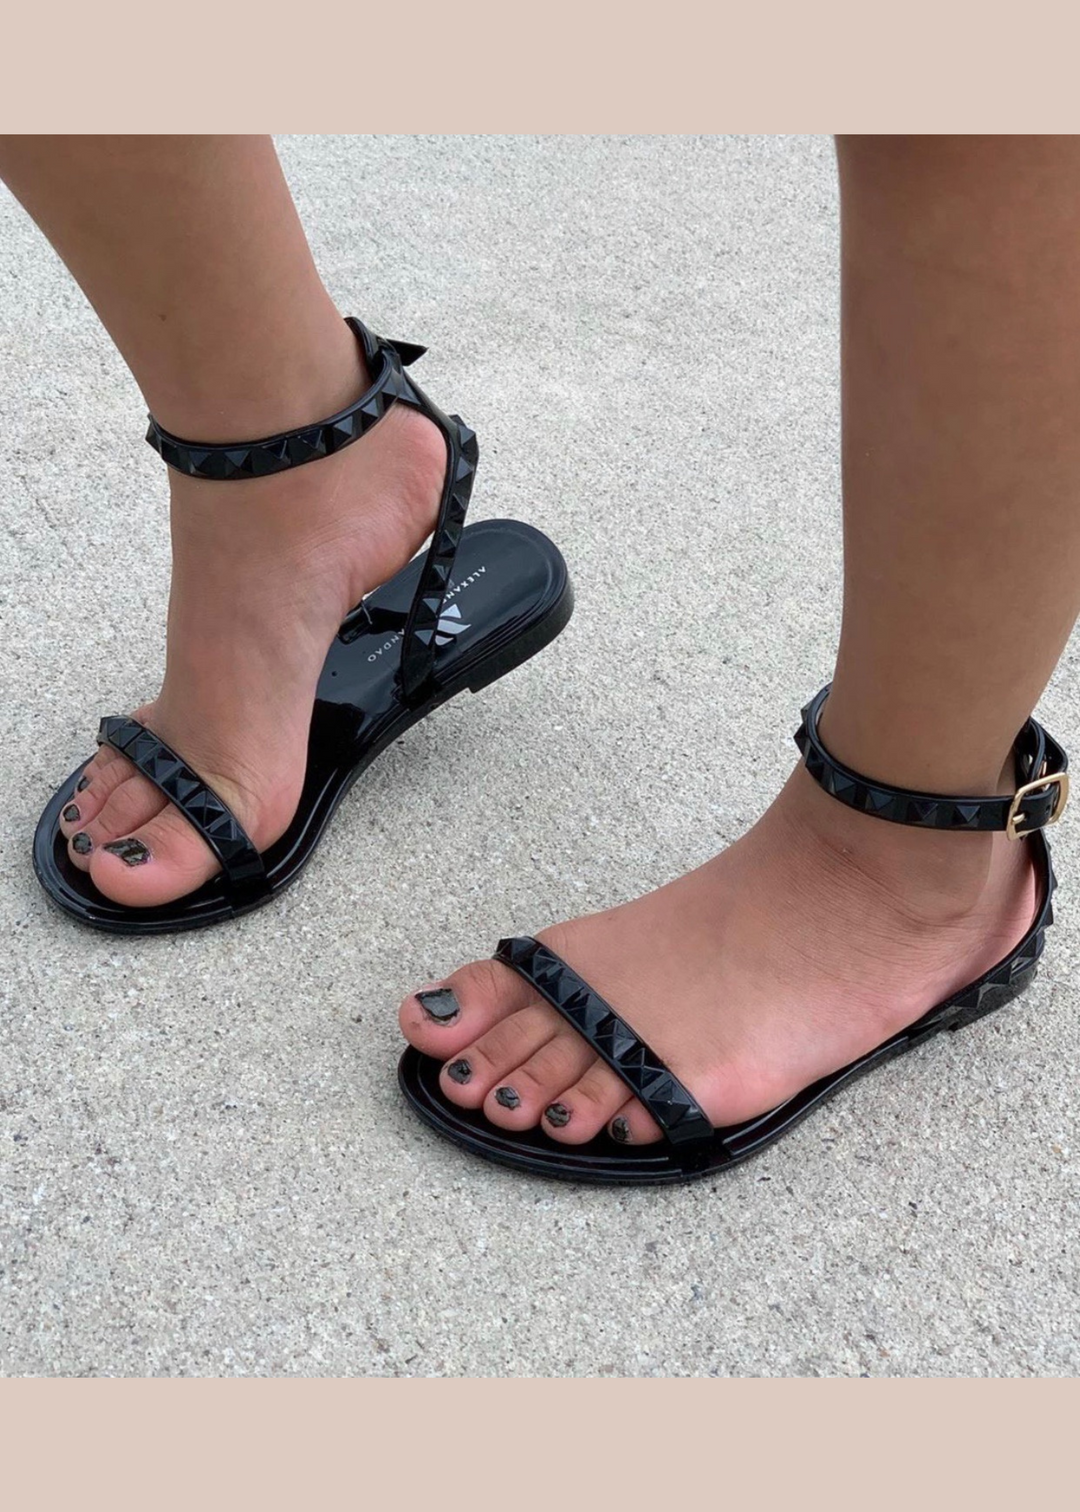 Kid's Aria Black Sandals with thin strap around the ankle this sandal is perfect for beach and pool days, you can wear them with a casual chic look